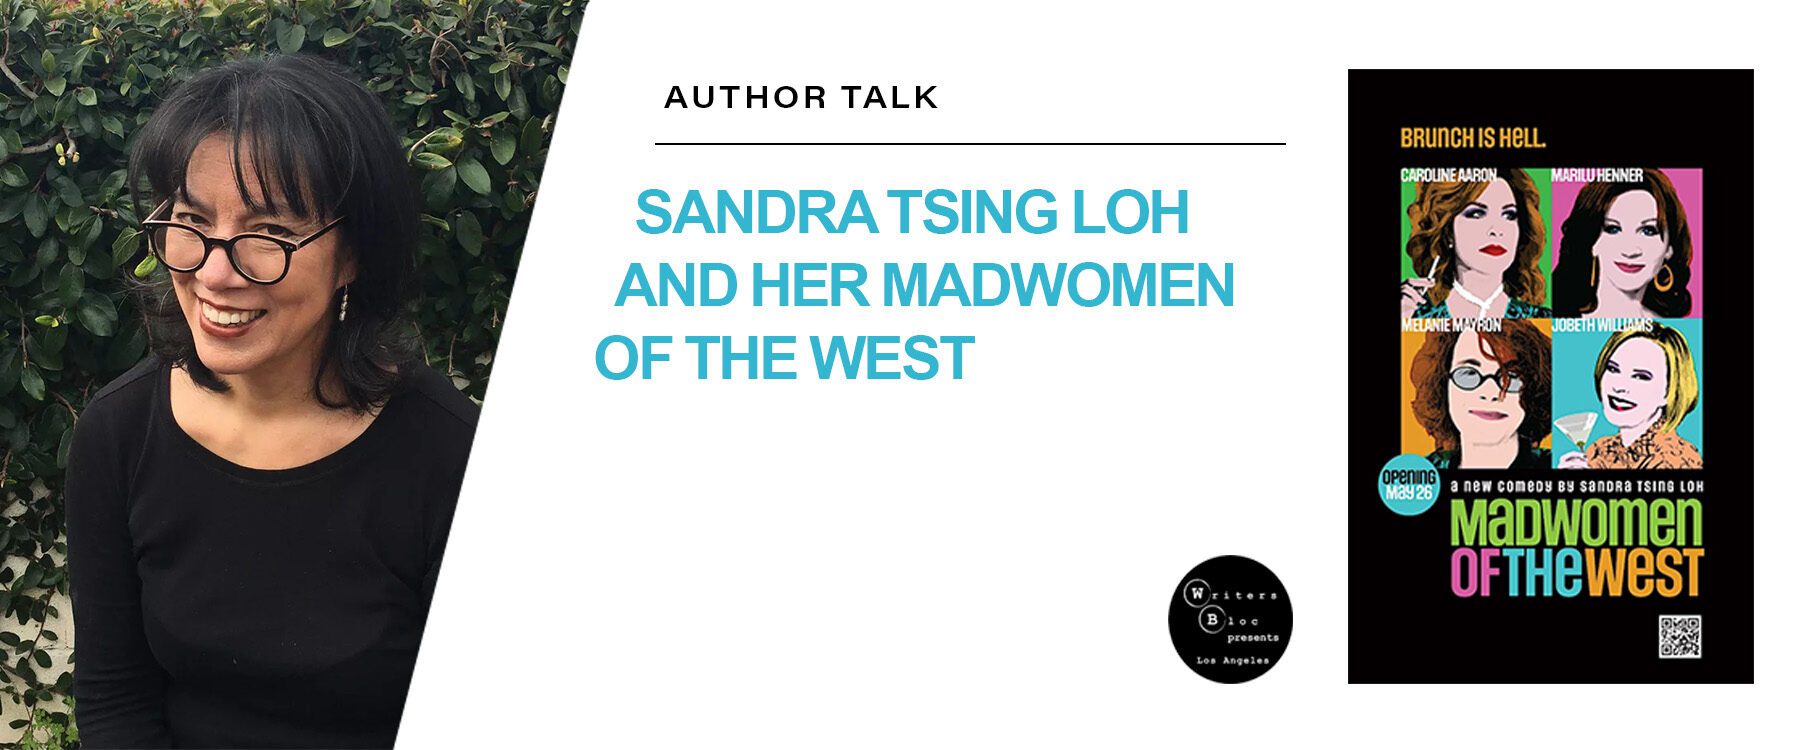 Author Talk: Sandra Tsing Loh and her Madwomen of the West